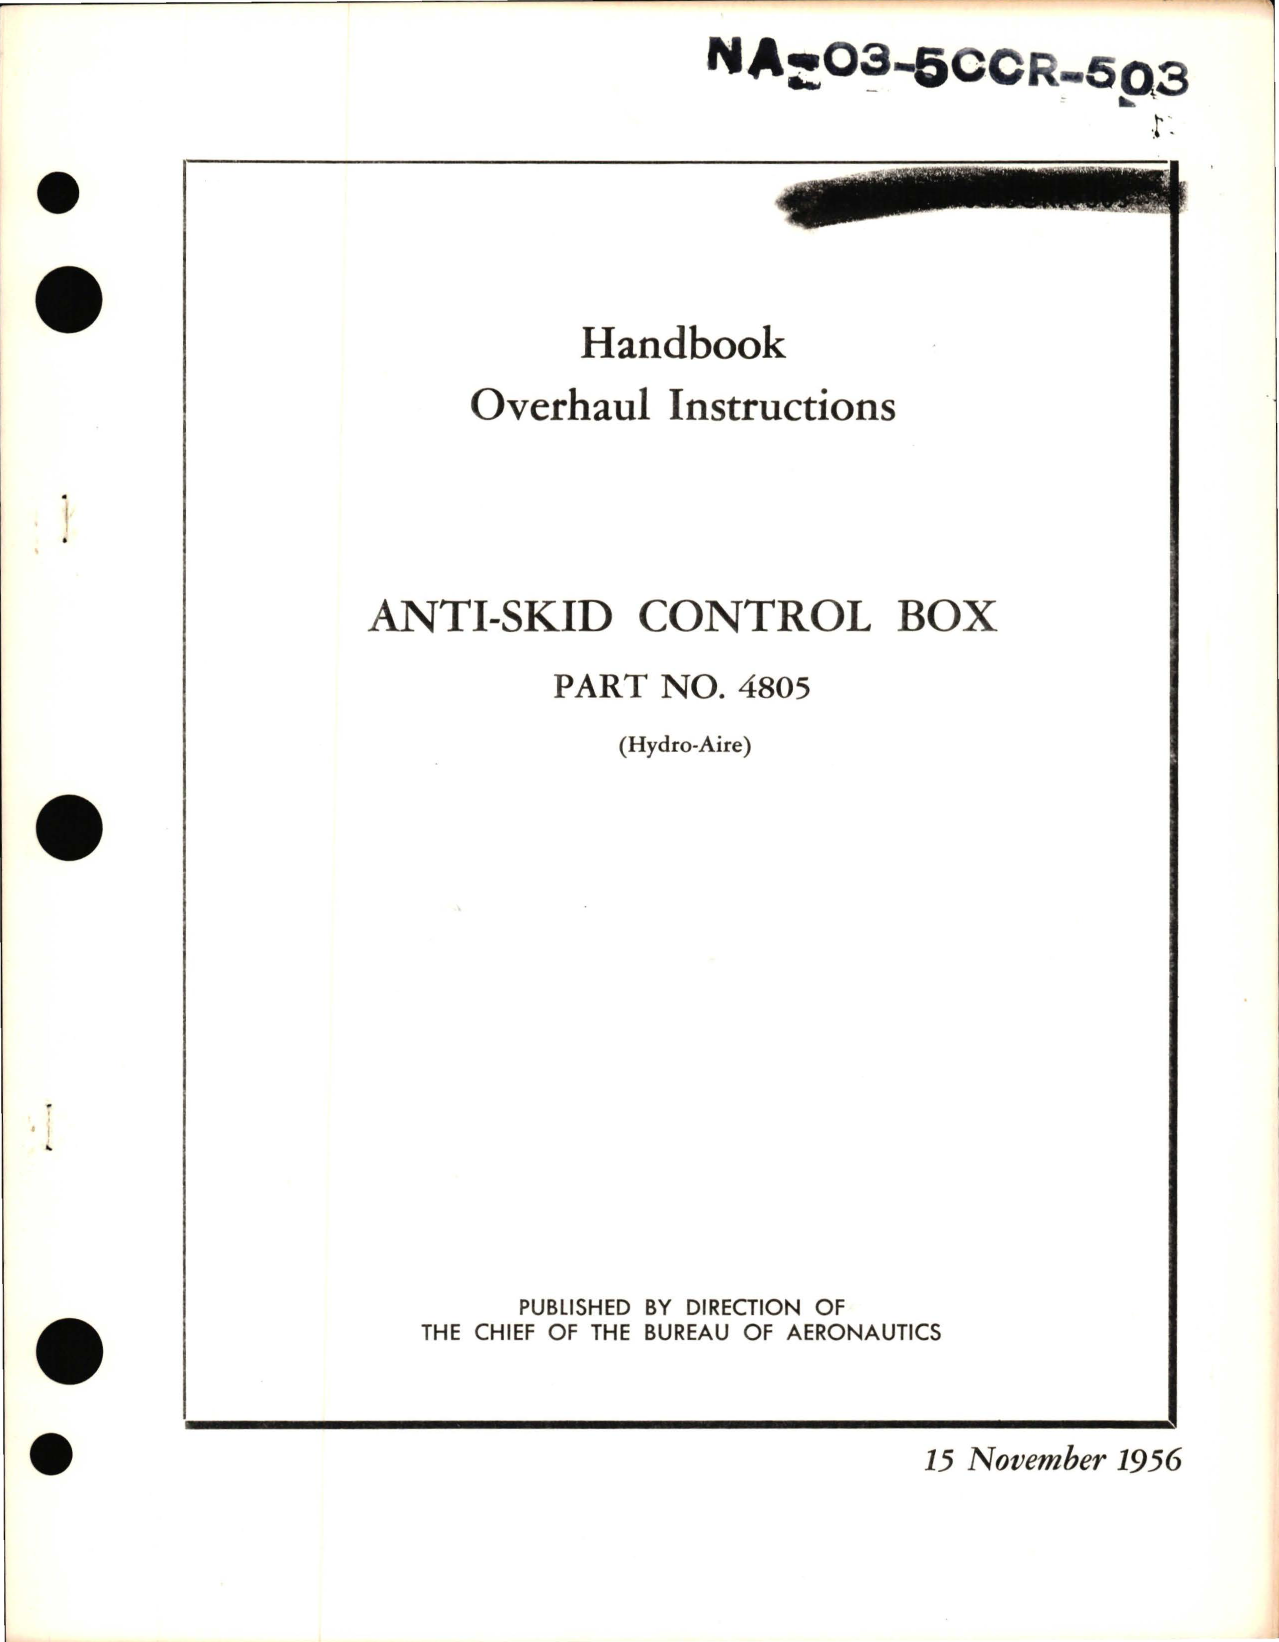 Sample page 1 from AirCorps Library document: Overhaul Instructions for Anti-Skid Control Box - Part 4805 